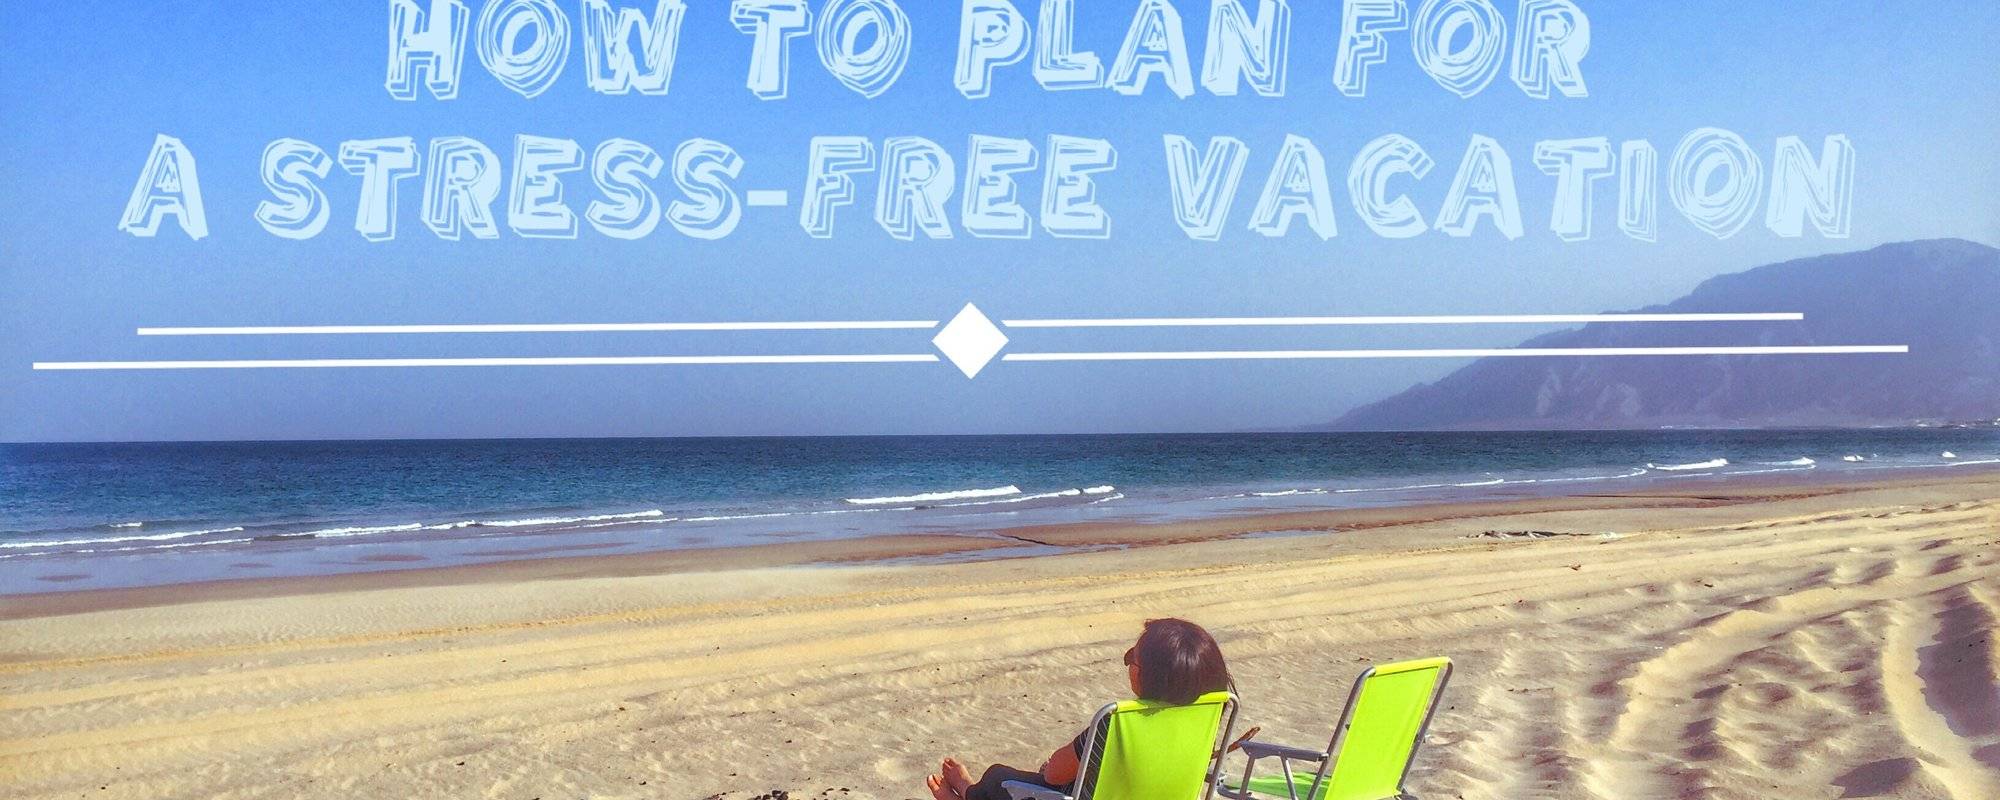 Travel Hack 9: This Is How You Plan A Stress-Free Vacation